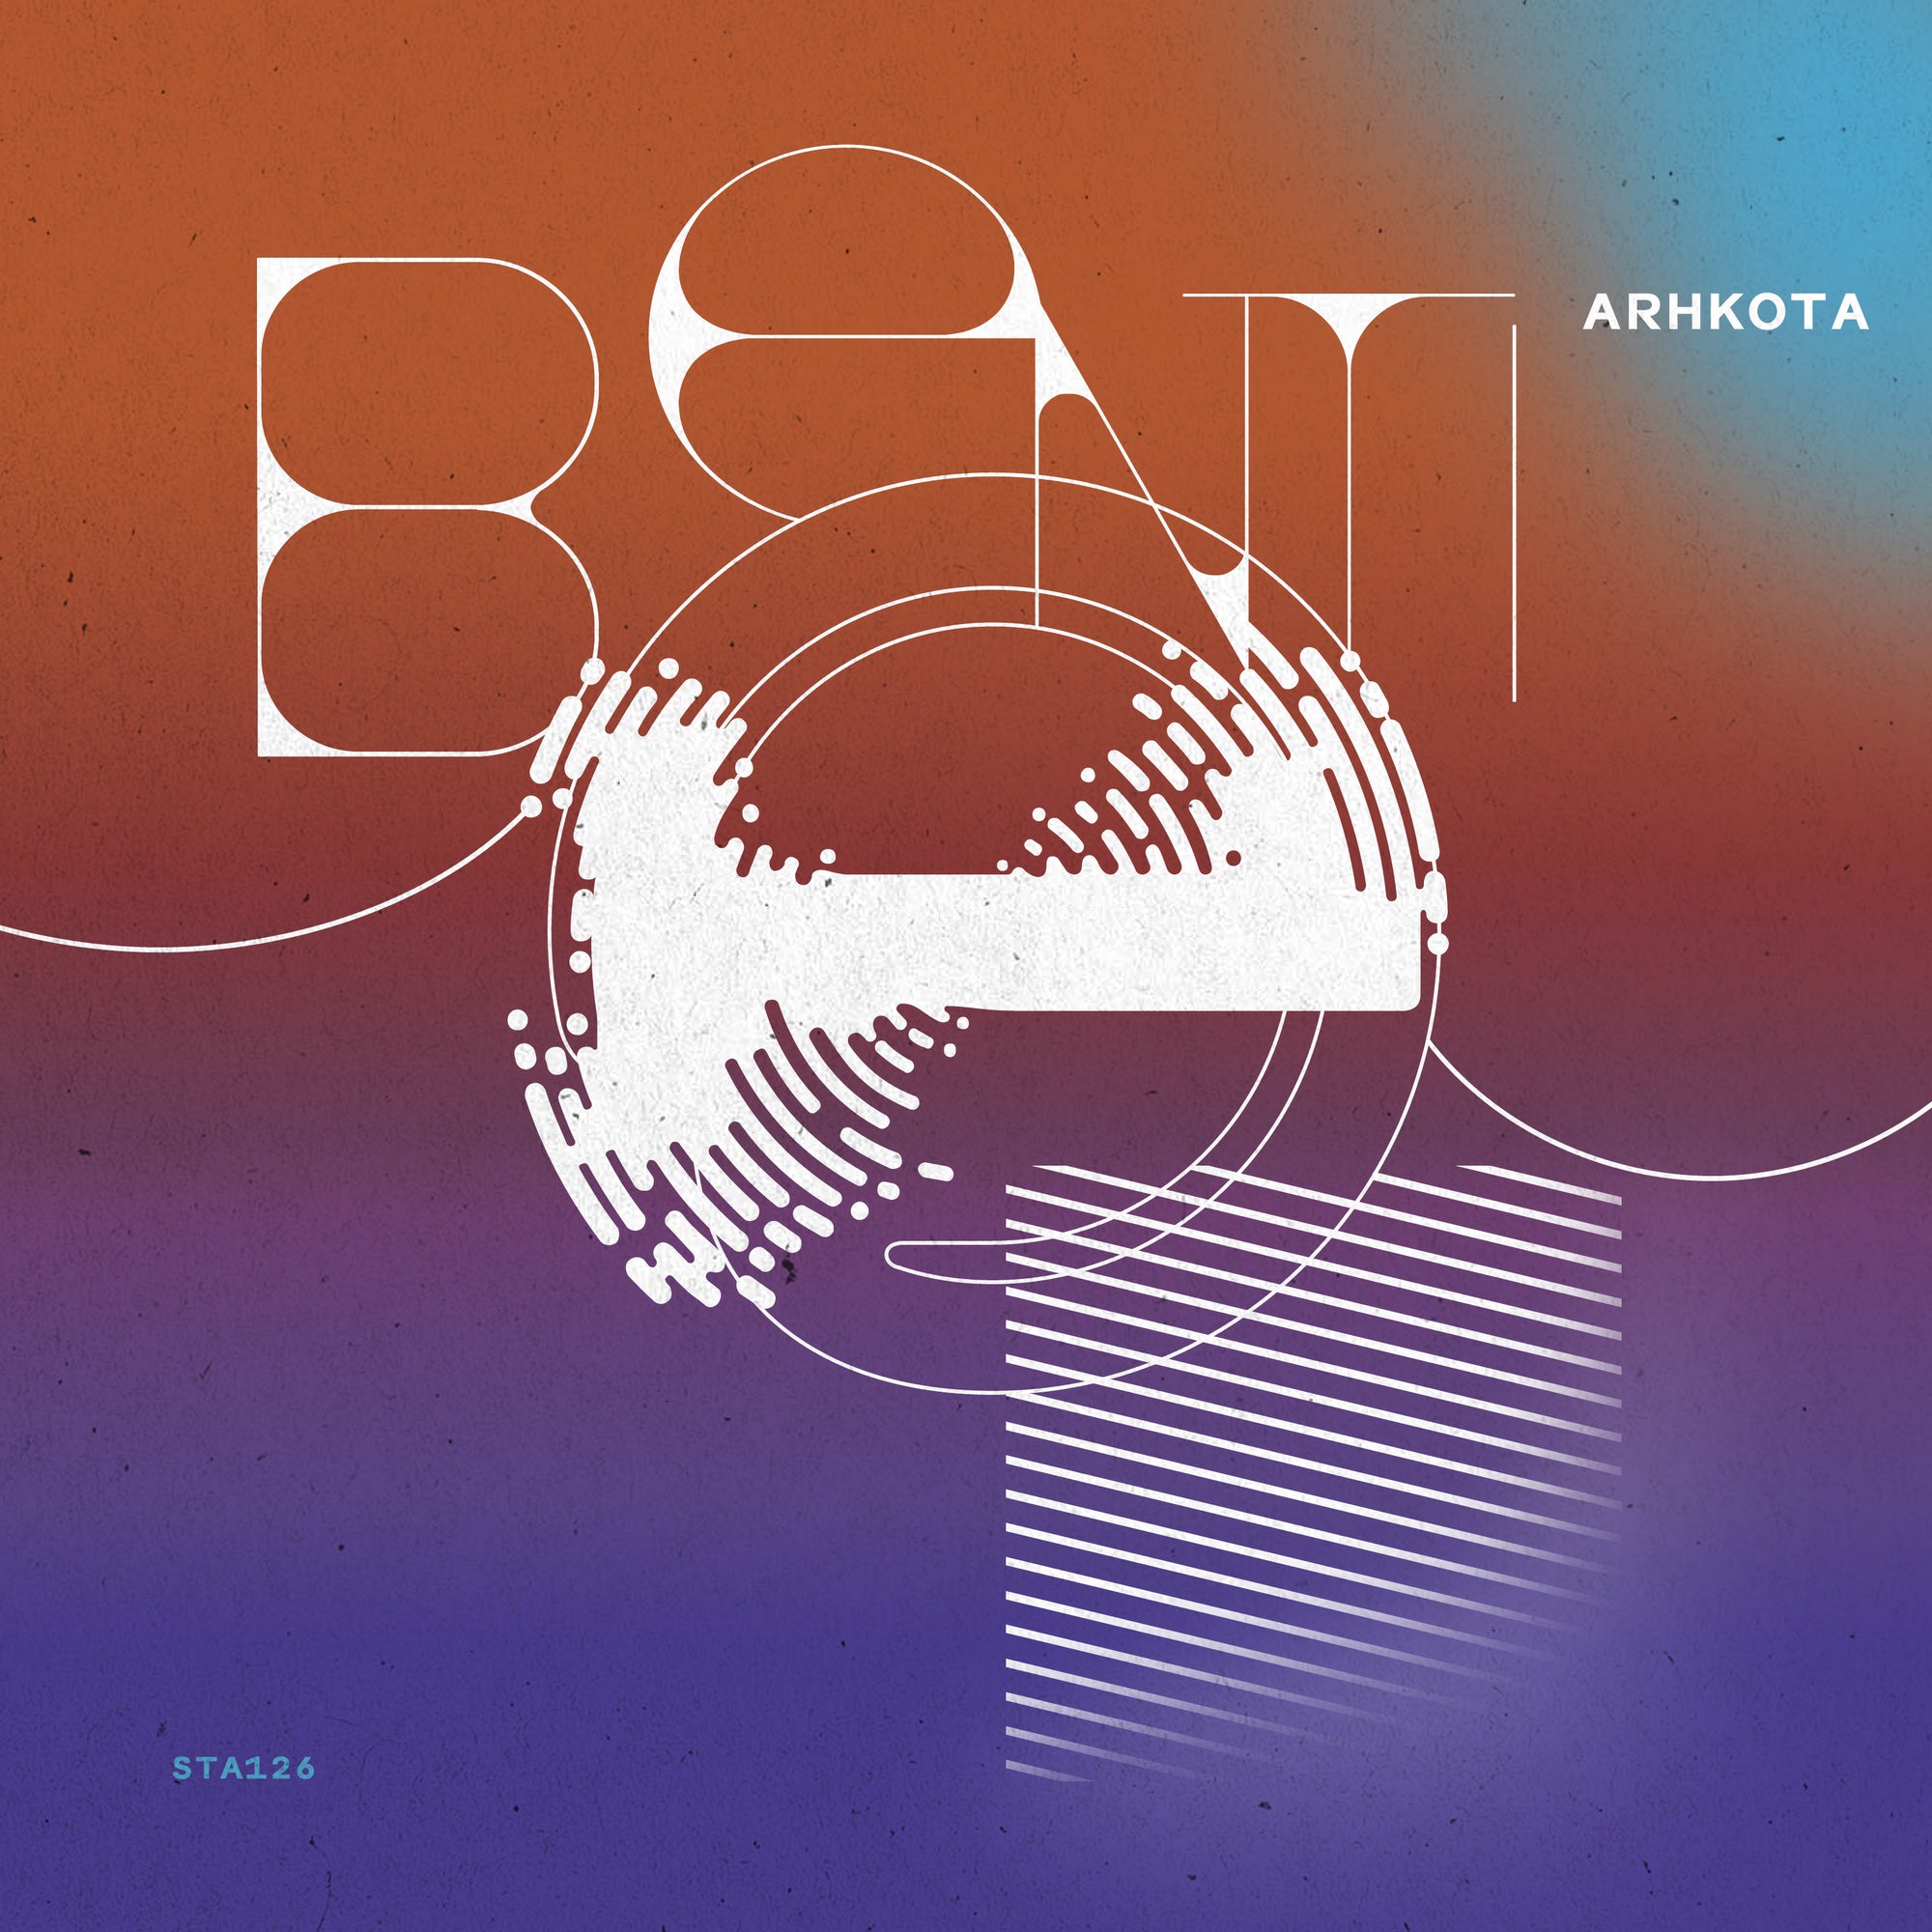 Arhkota's ‘Benti’ Shines Through A Tapestry of Dreamlike Soundscapes and Raw Emotion